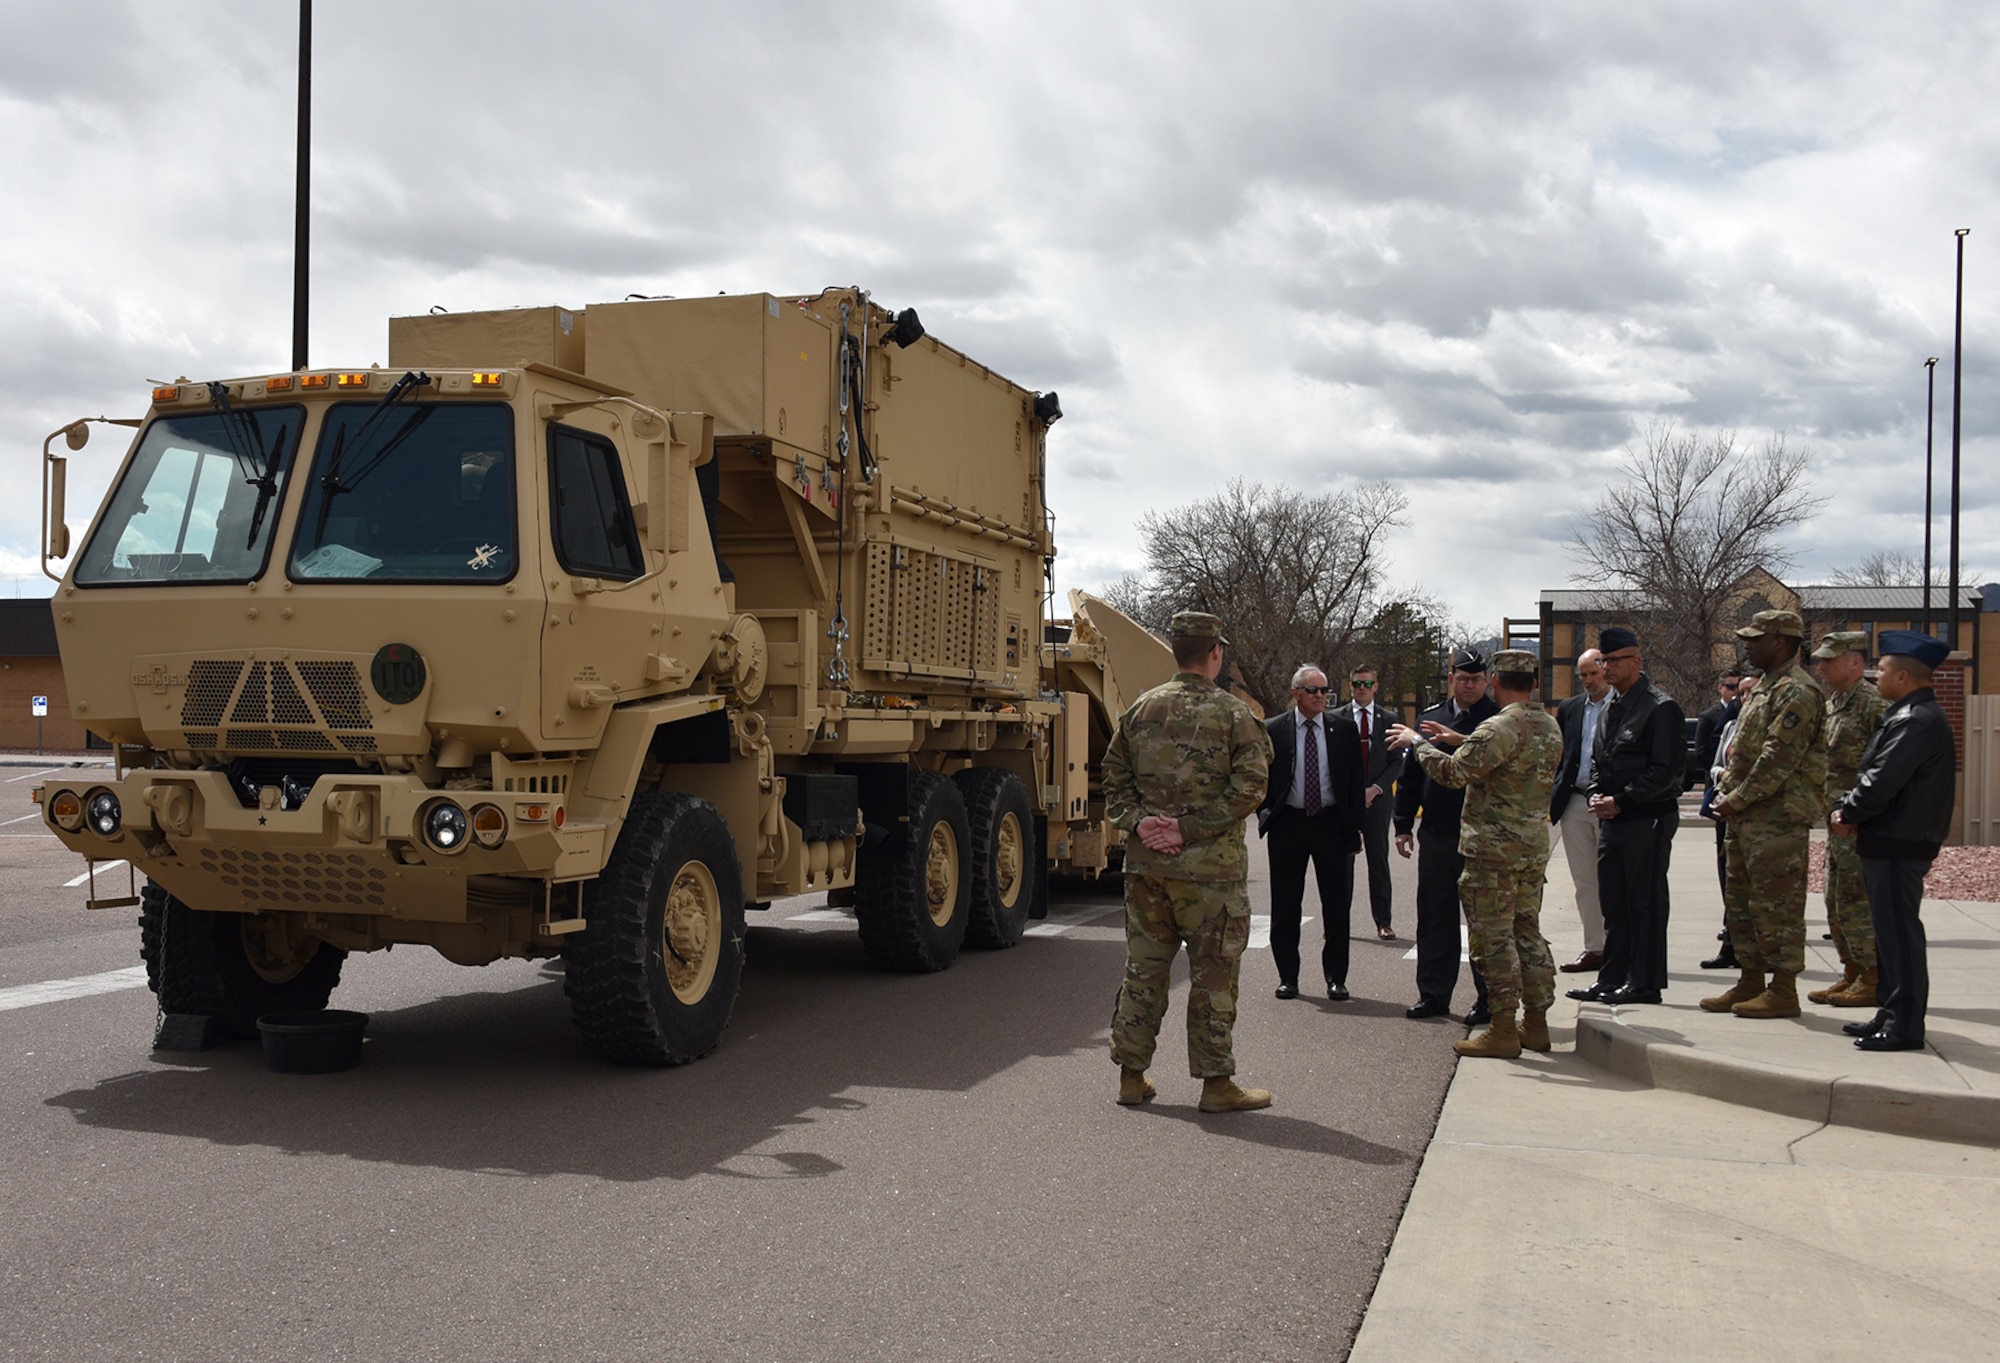 Col. Mark Cobos, commander, 1st Space Brigade, U.S. Army Space and Missile Defense Command, discusses Army space capabilities with Chief of Space Operations U.S. Space Force Gen. Chance Saltzman and Chief Master Sgt. of the Space Force John F. Bentivegna during a visit to the brigade headquarters at Fort Carson, Colorado, April 10. (U.S. Army photo by Dottie White)